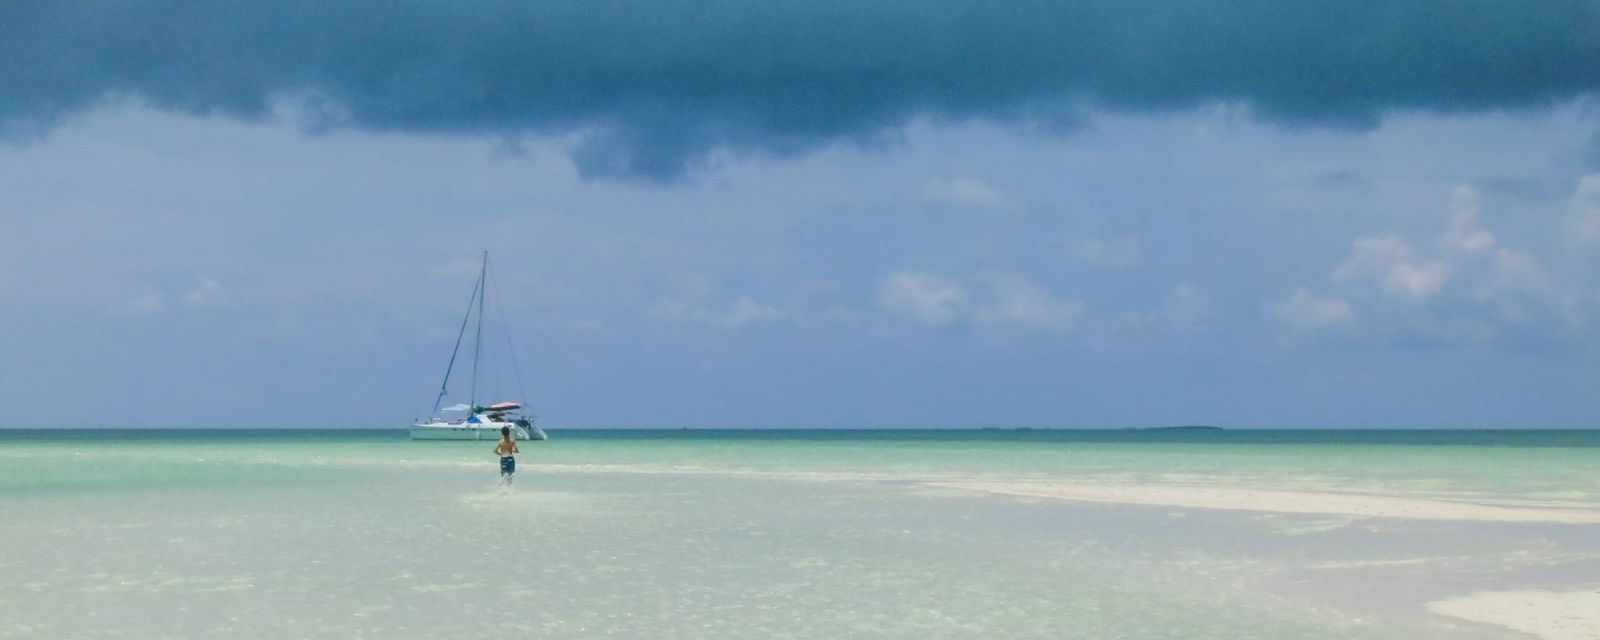 Experience the Cayo Largo Lagoon in Cuba on a Boat Tour